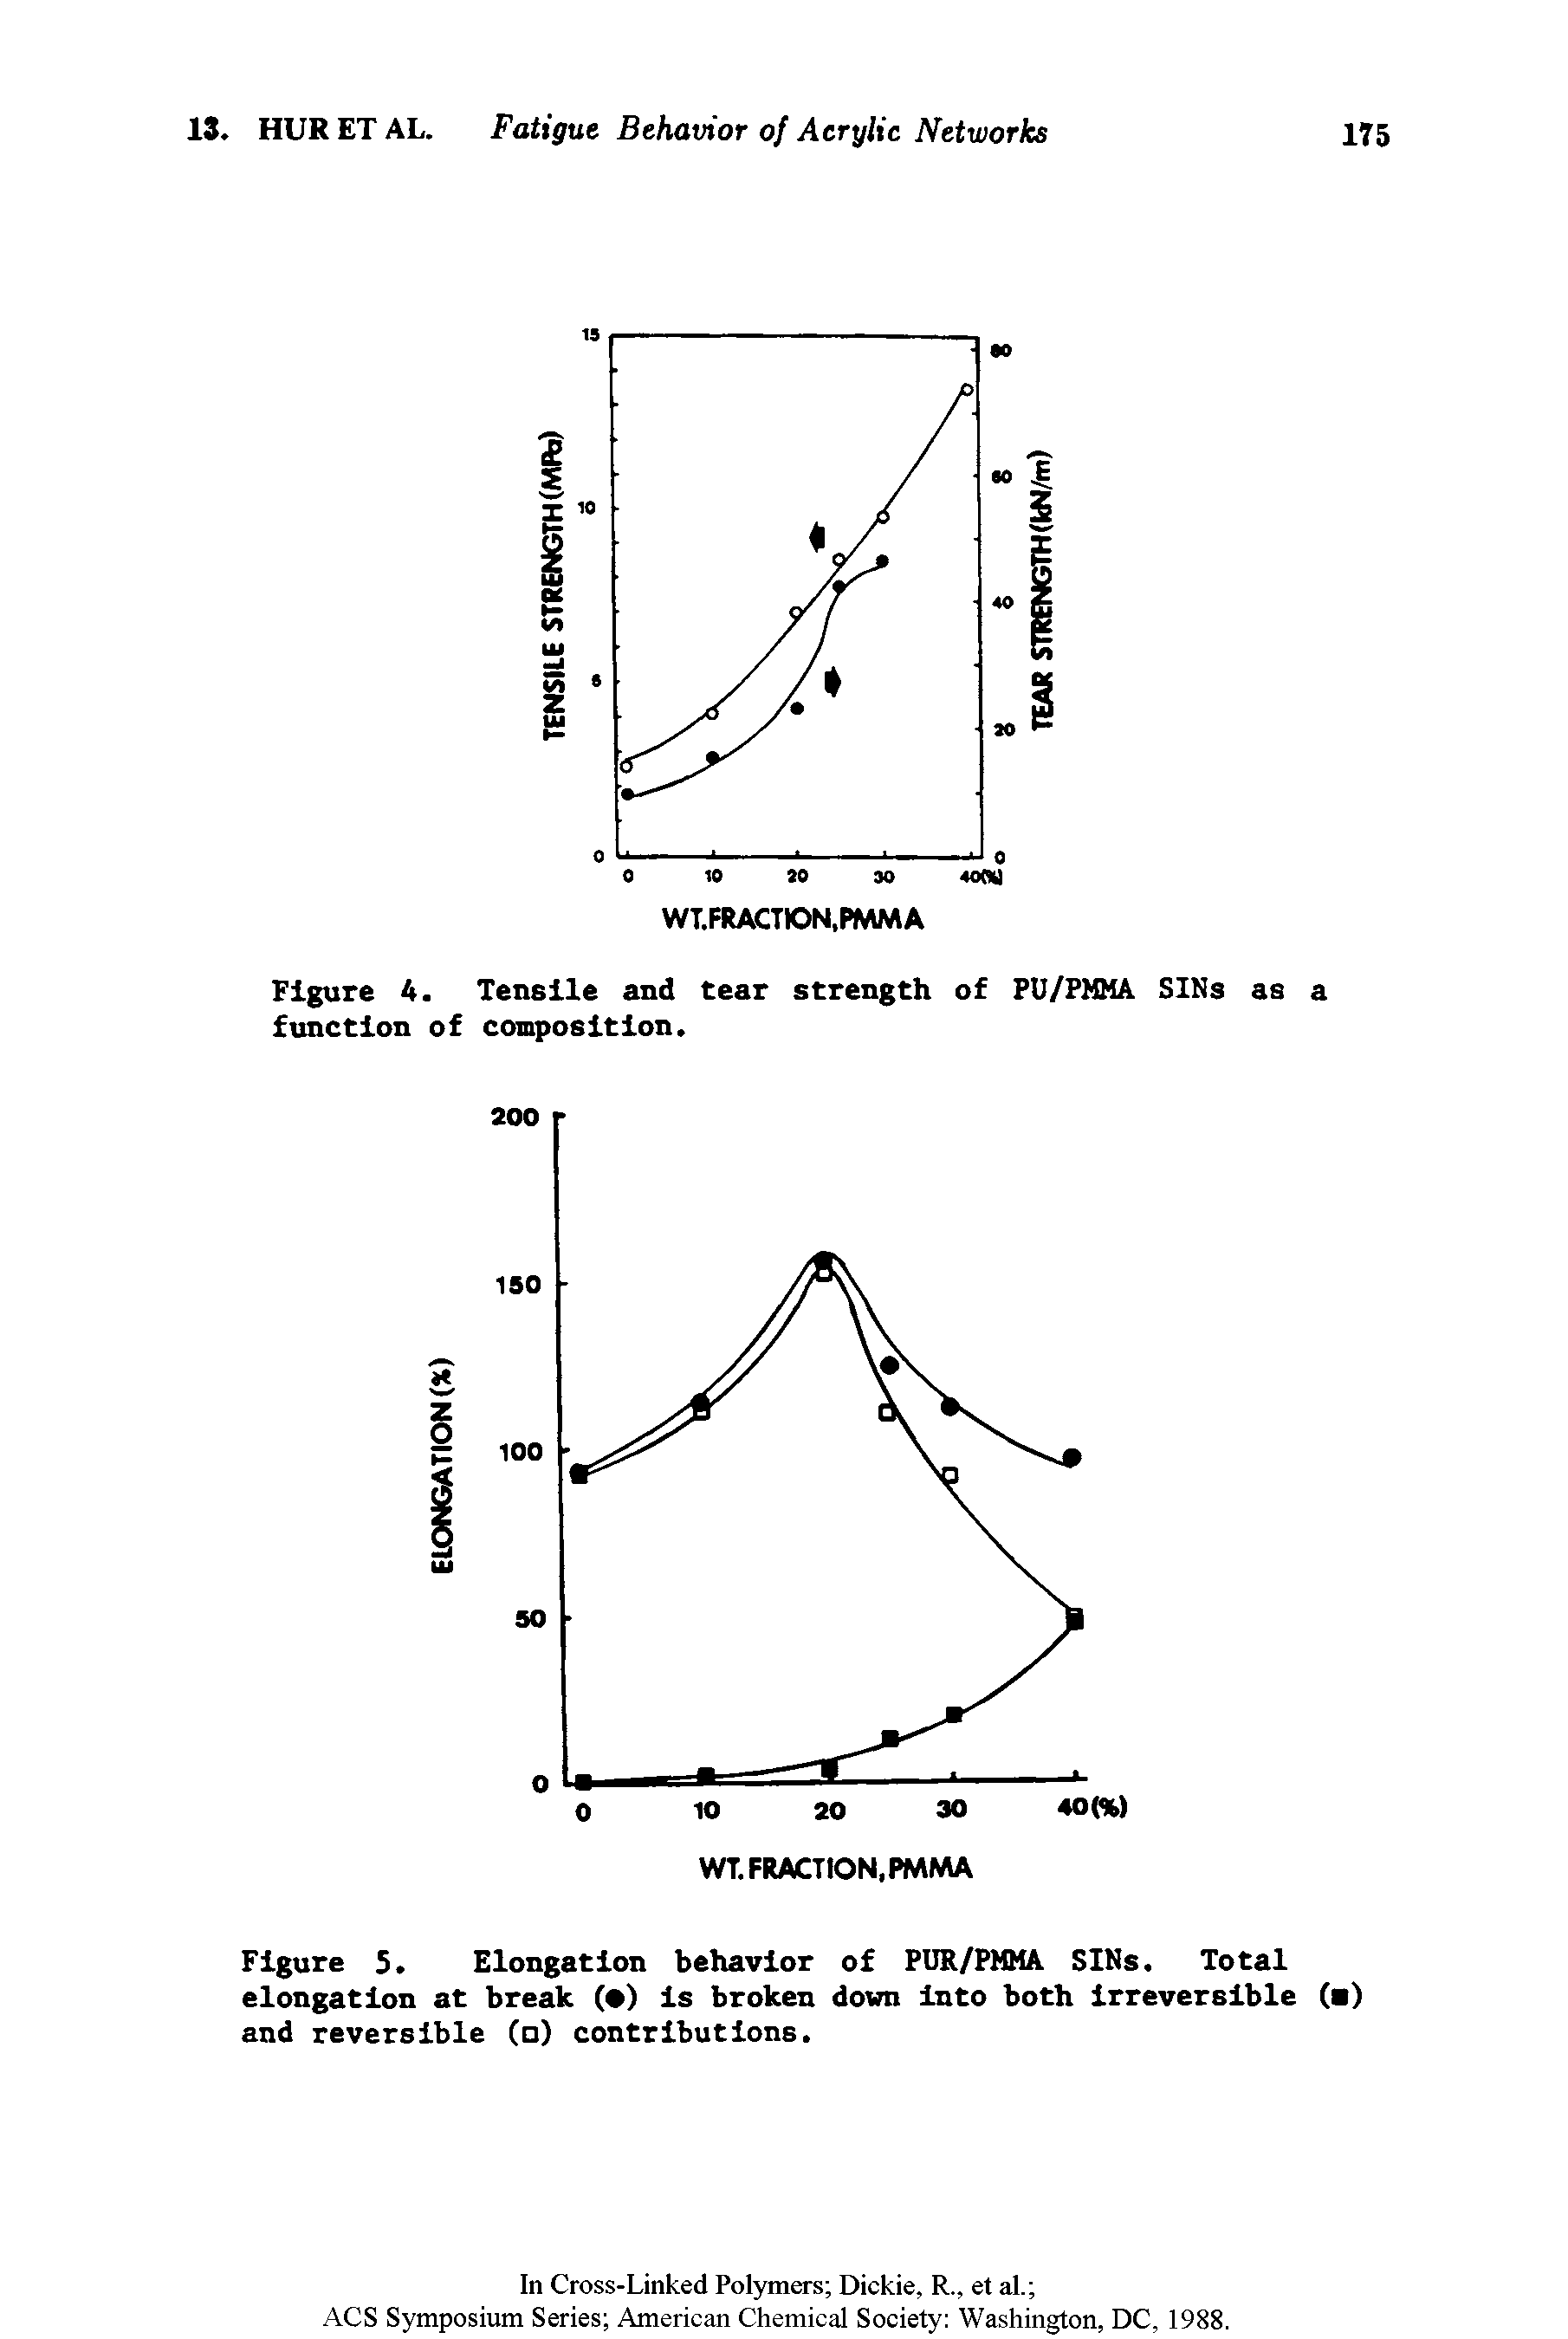 Figure 4. Tensile and tear strength of FU/FMMA SlNs as a function of composition.